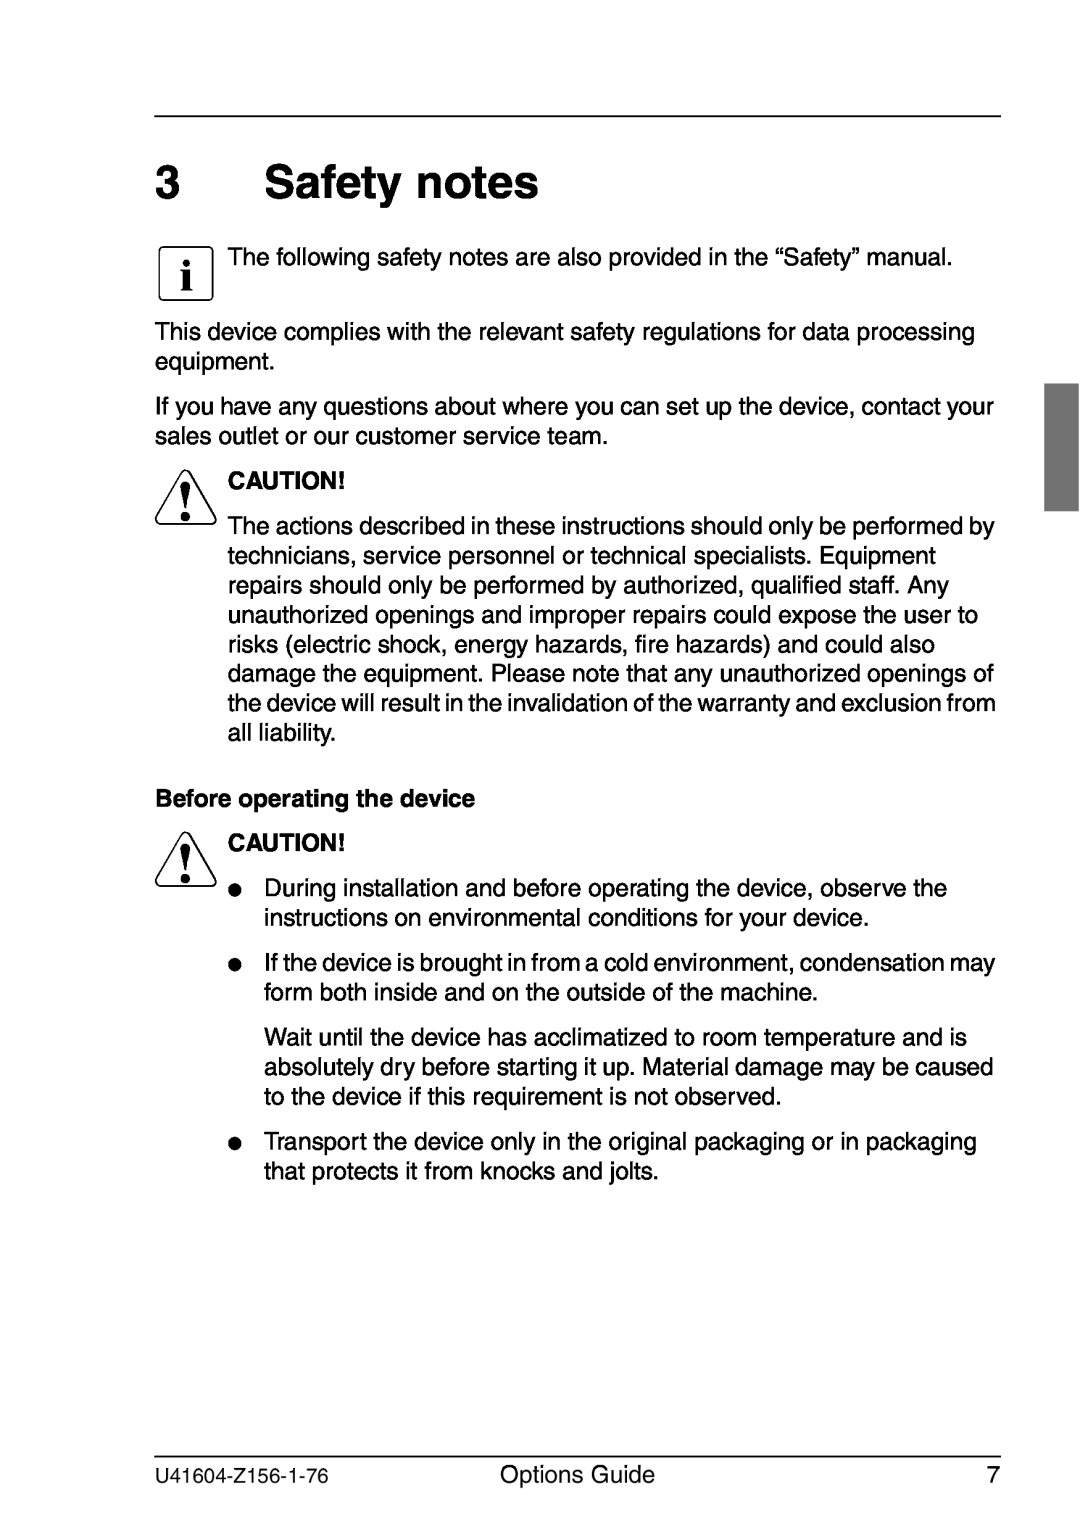 Fujitsu TX150 S3 manual Safety notes, Before operating the device V CAUTION, V Caution 